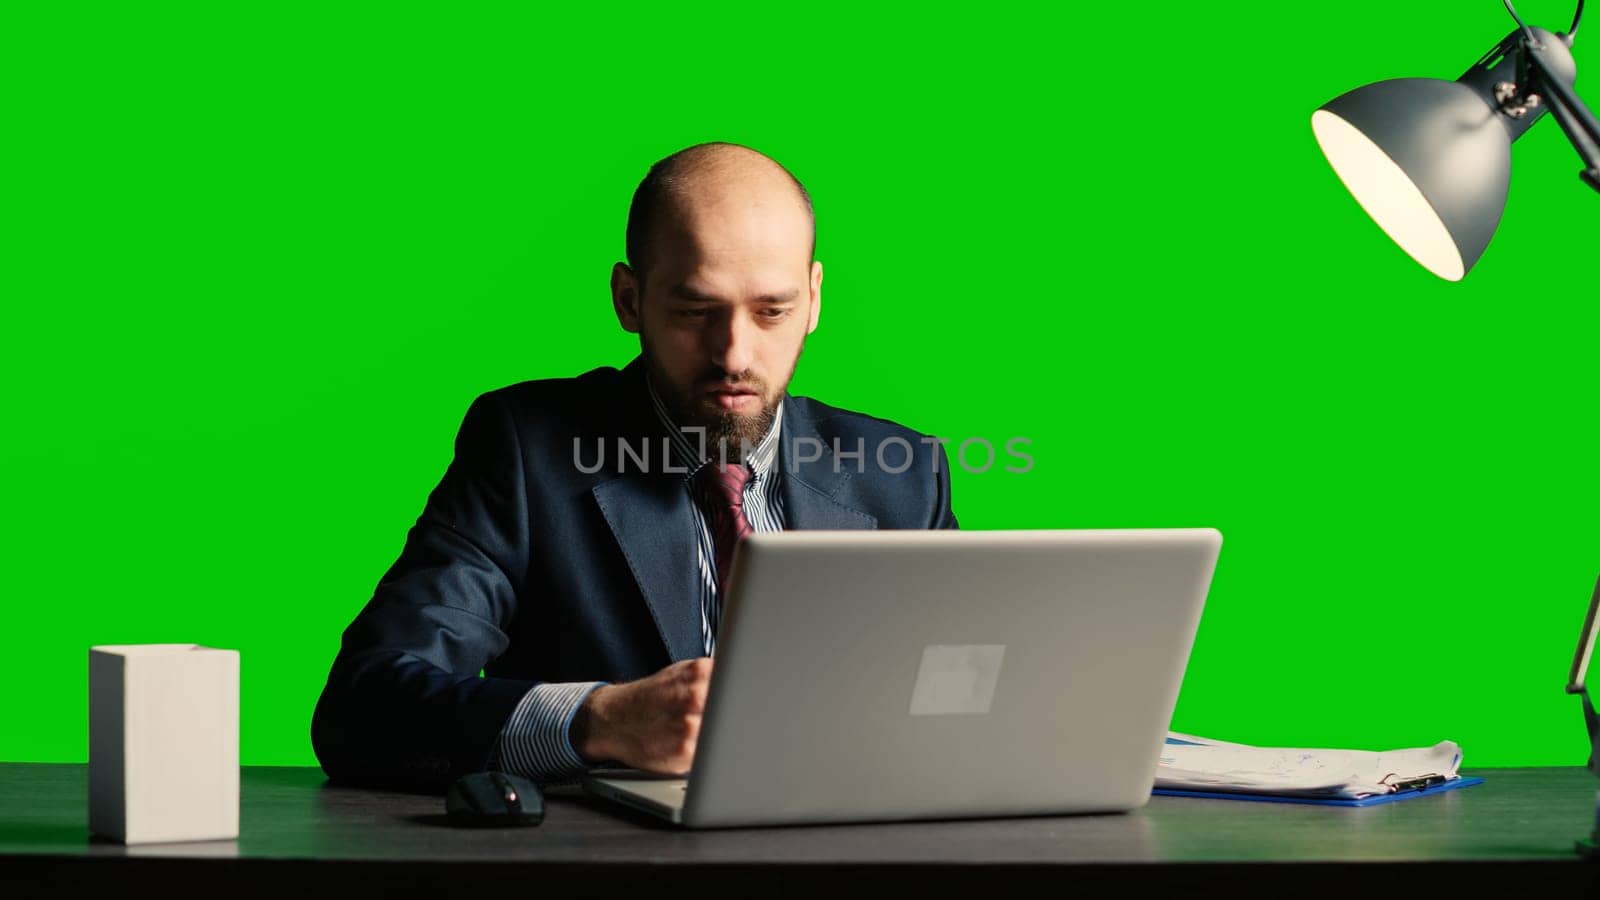 Team leader analyzing papers sitting over green screen, working with laptop and taking notes on papers. Caucasian businessman posing over isolated mockup backdrop, chroma key space.